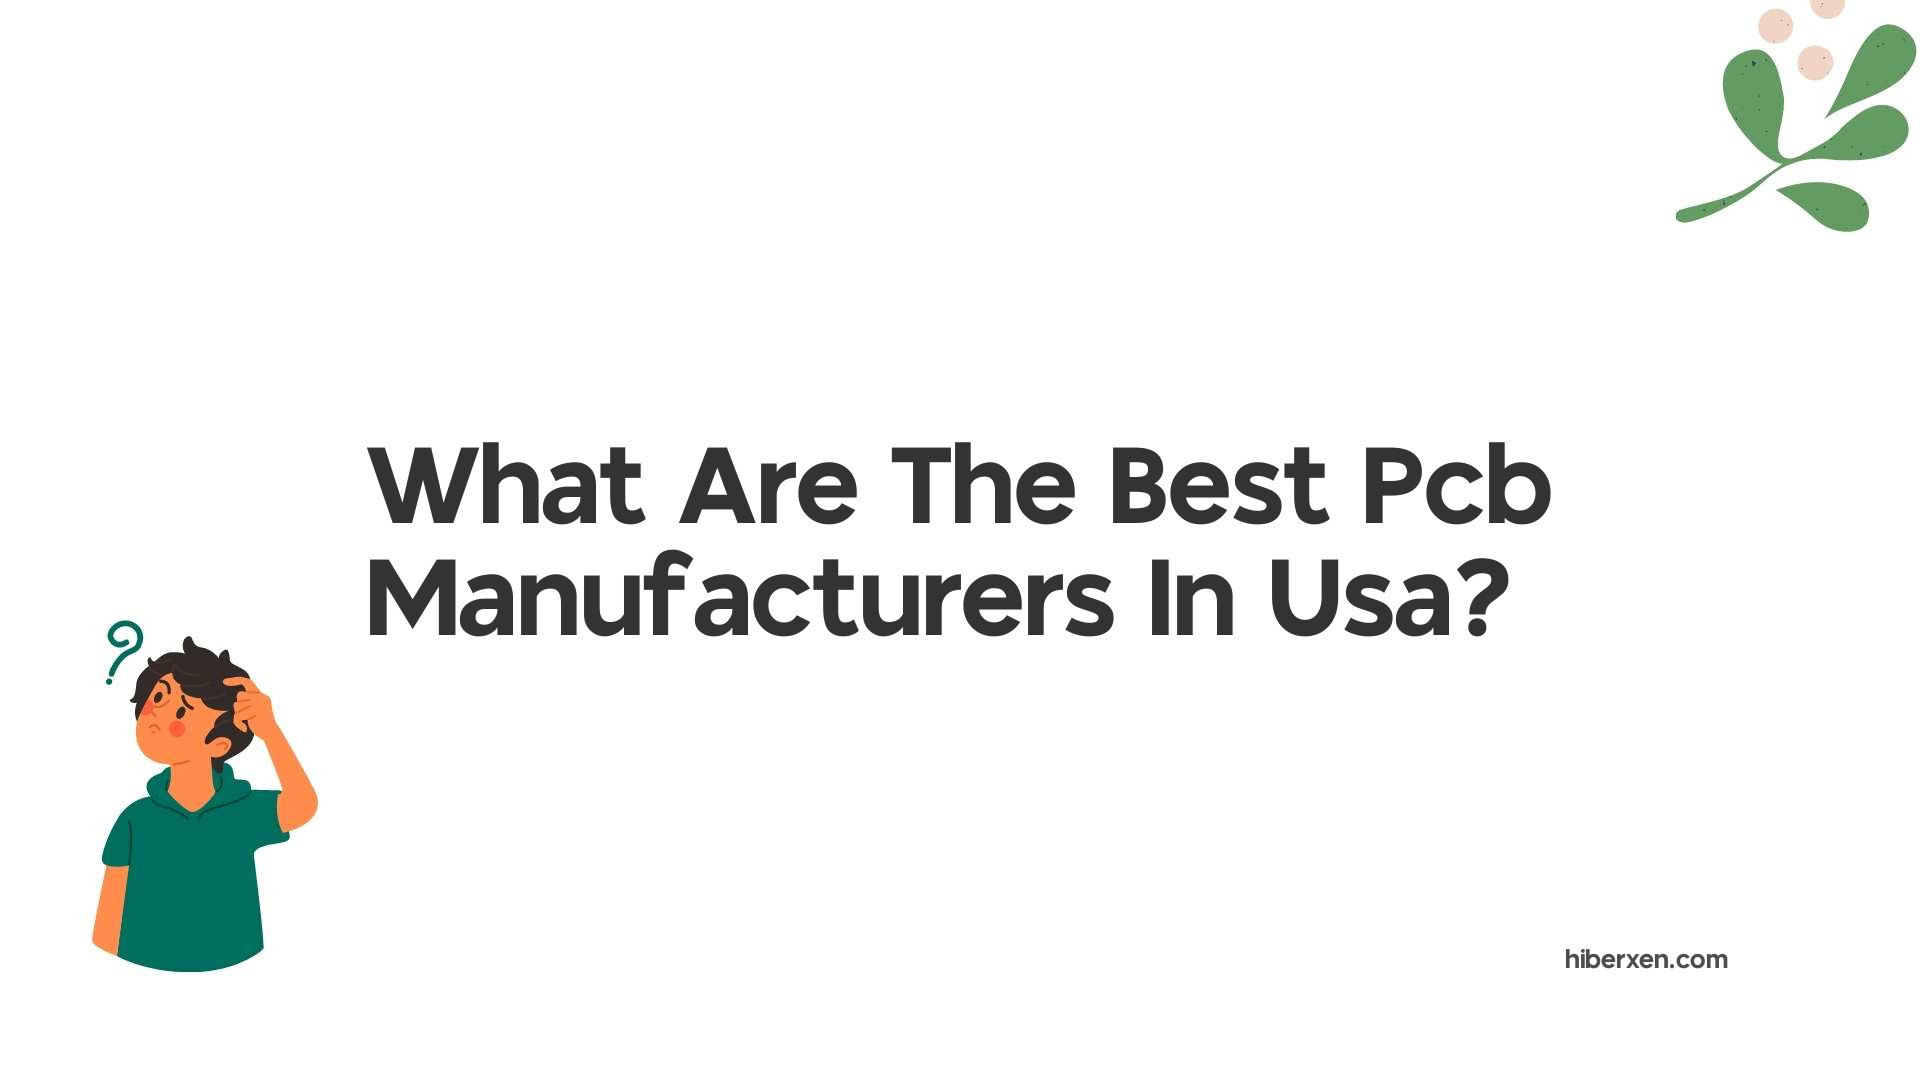 What Are The Best Pcb Manufacturers In Usa?